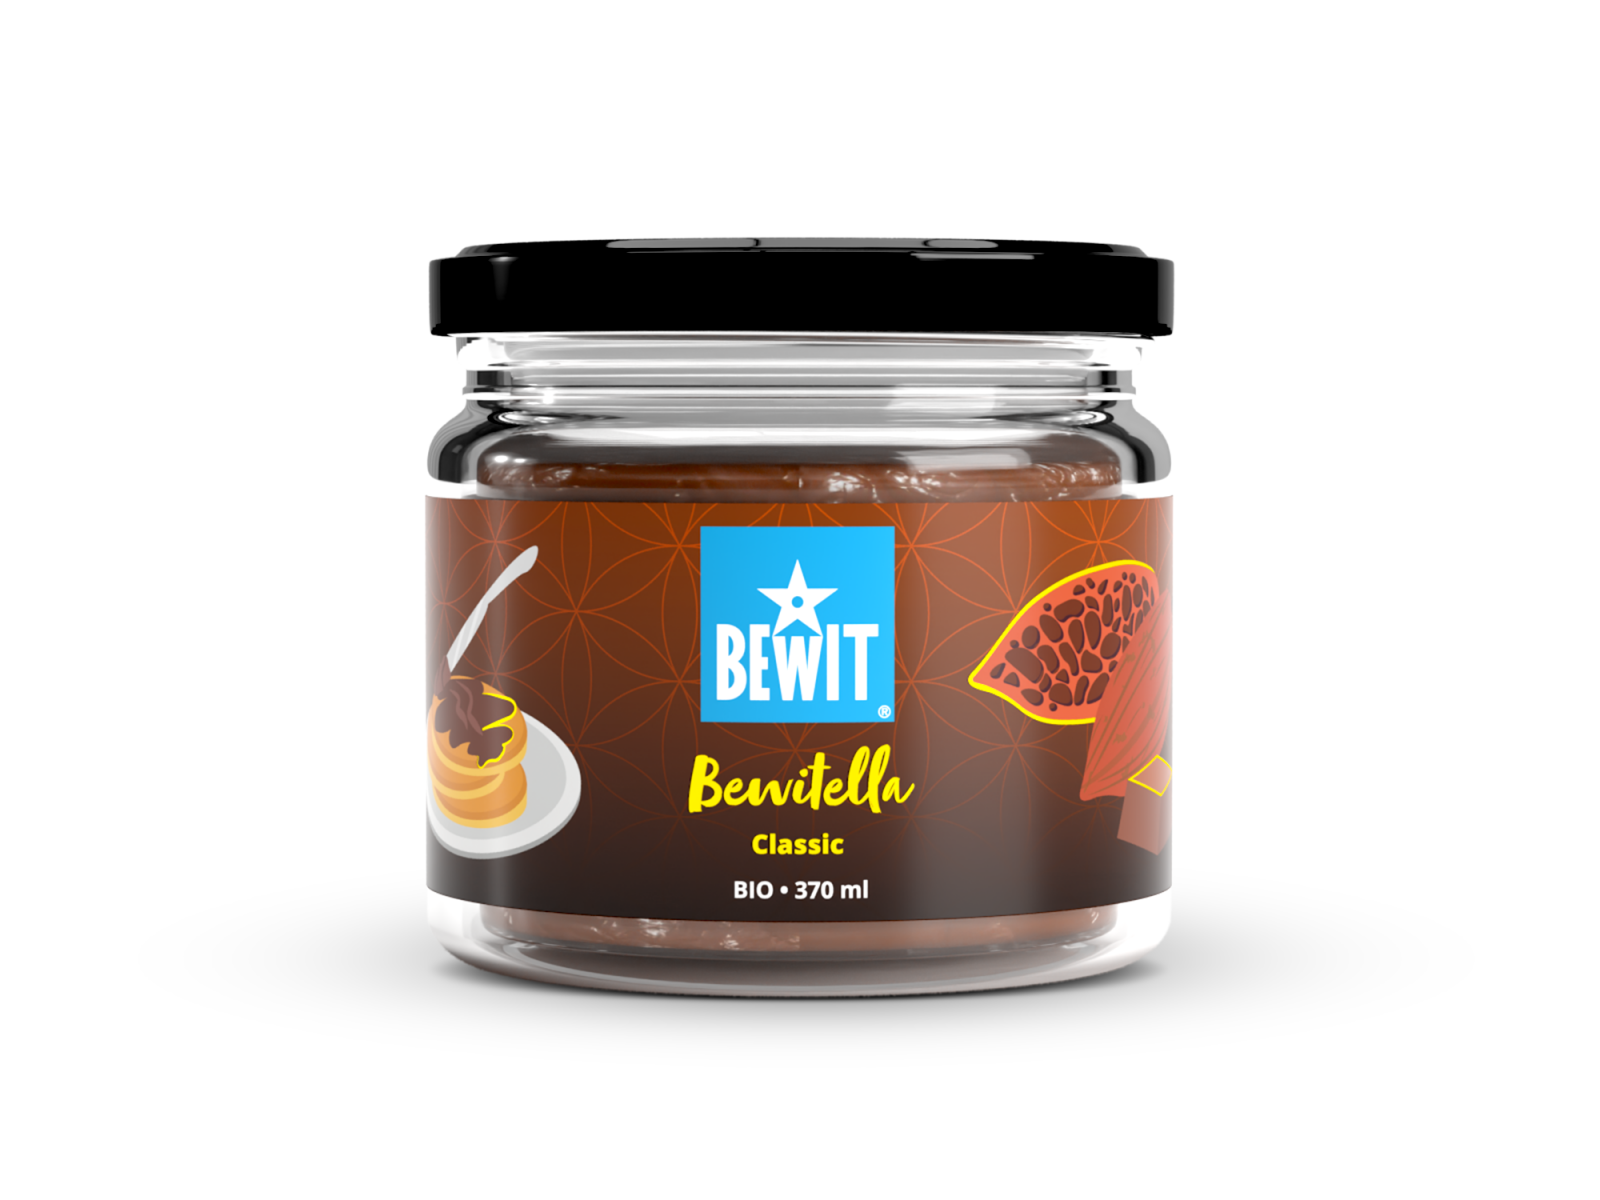 BEWIT BEWITELLA Classic BIO - DELICIOUS CREAM / SPREAD MADE FROM COCOA BEANS AND OTHER SUPERFOODS - 1